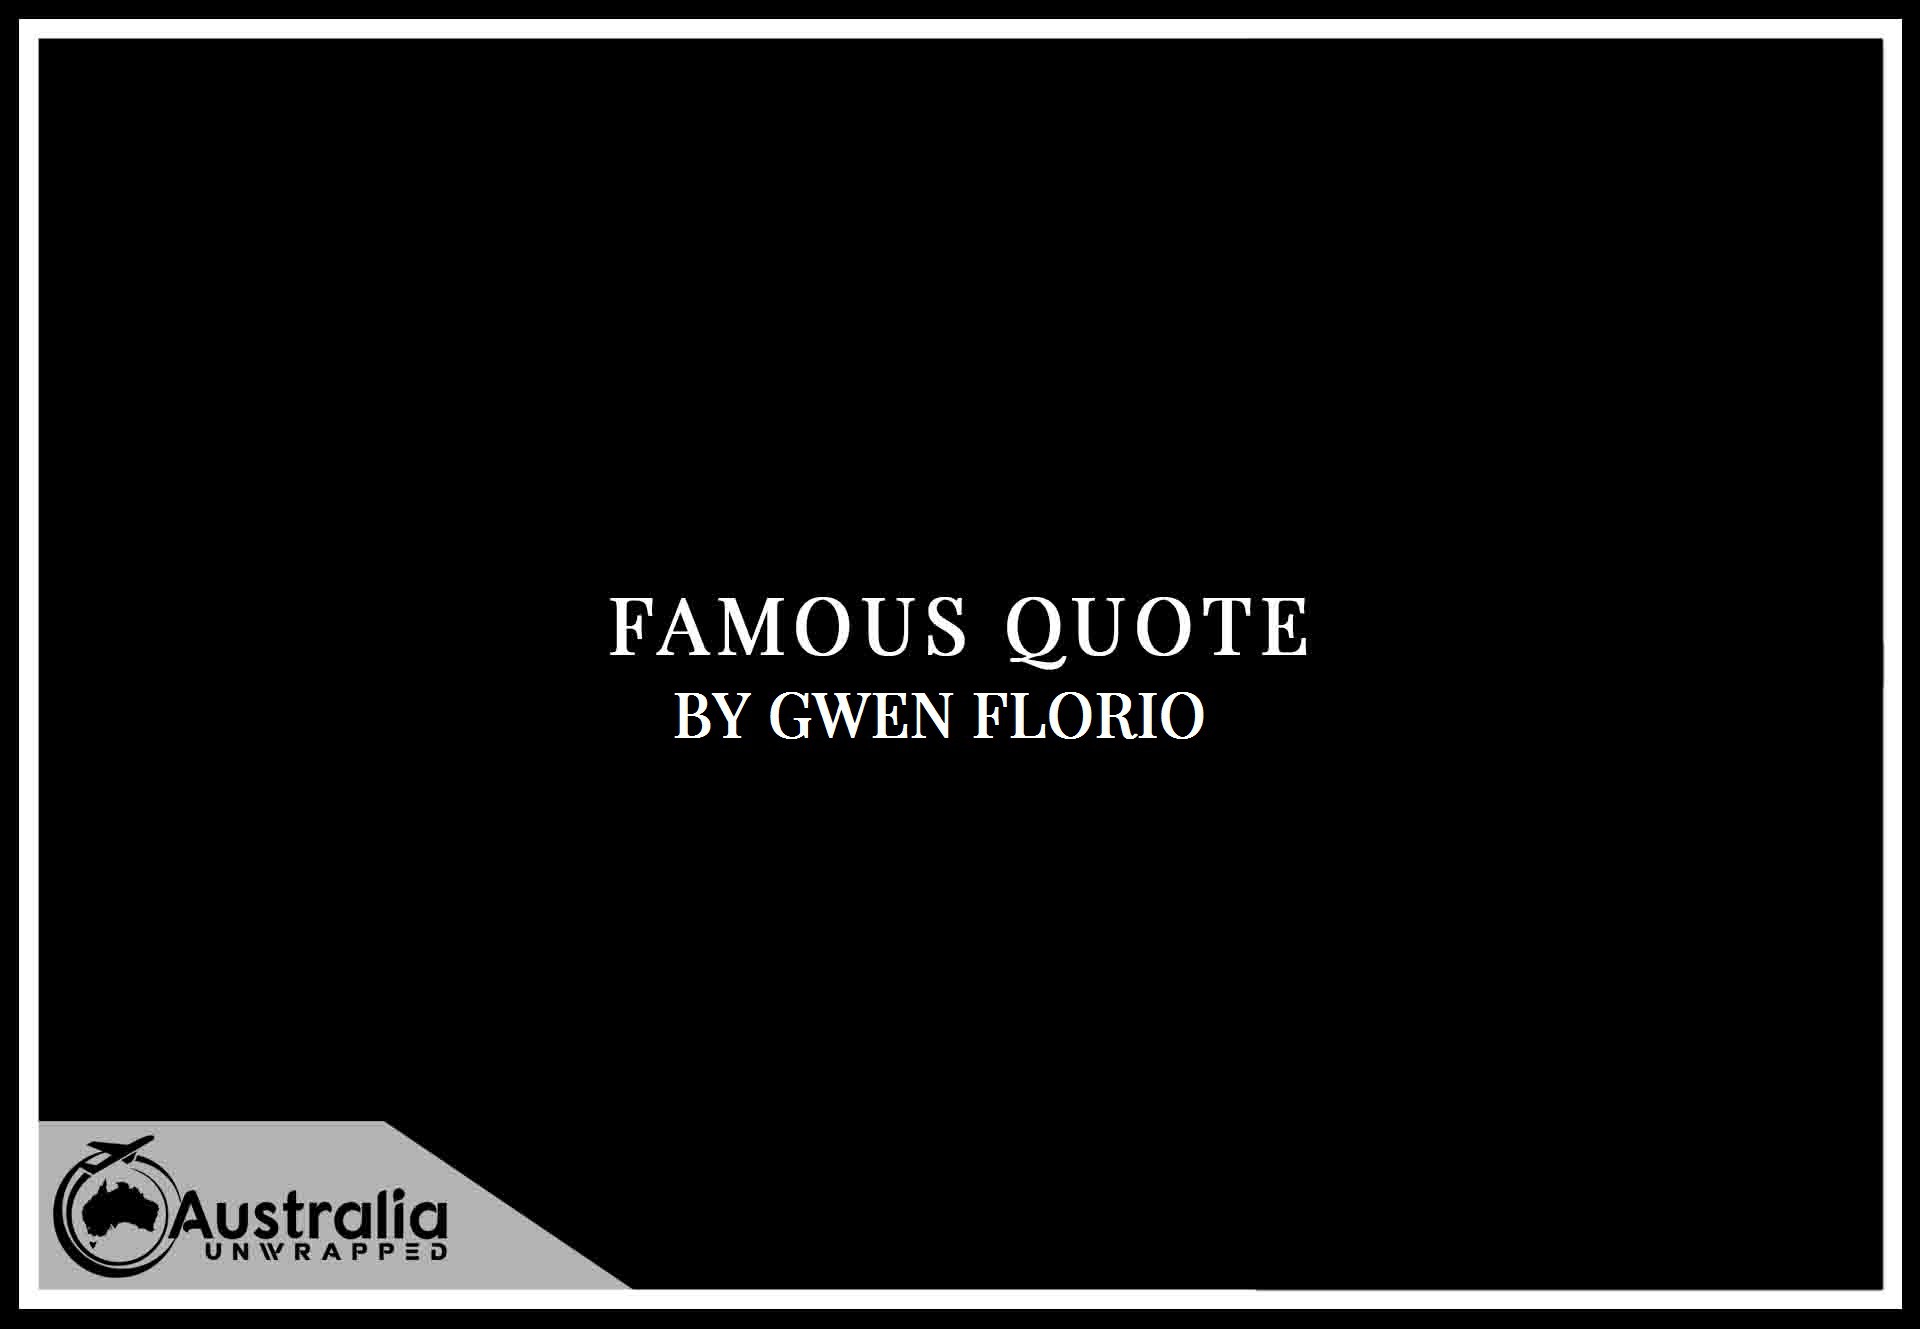 Gwen Florio’s Top 1 Popular and Famous Quotes